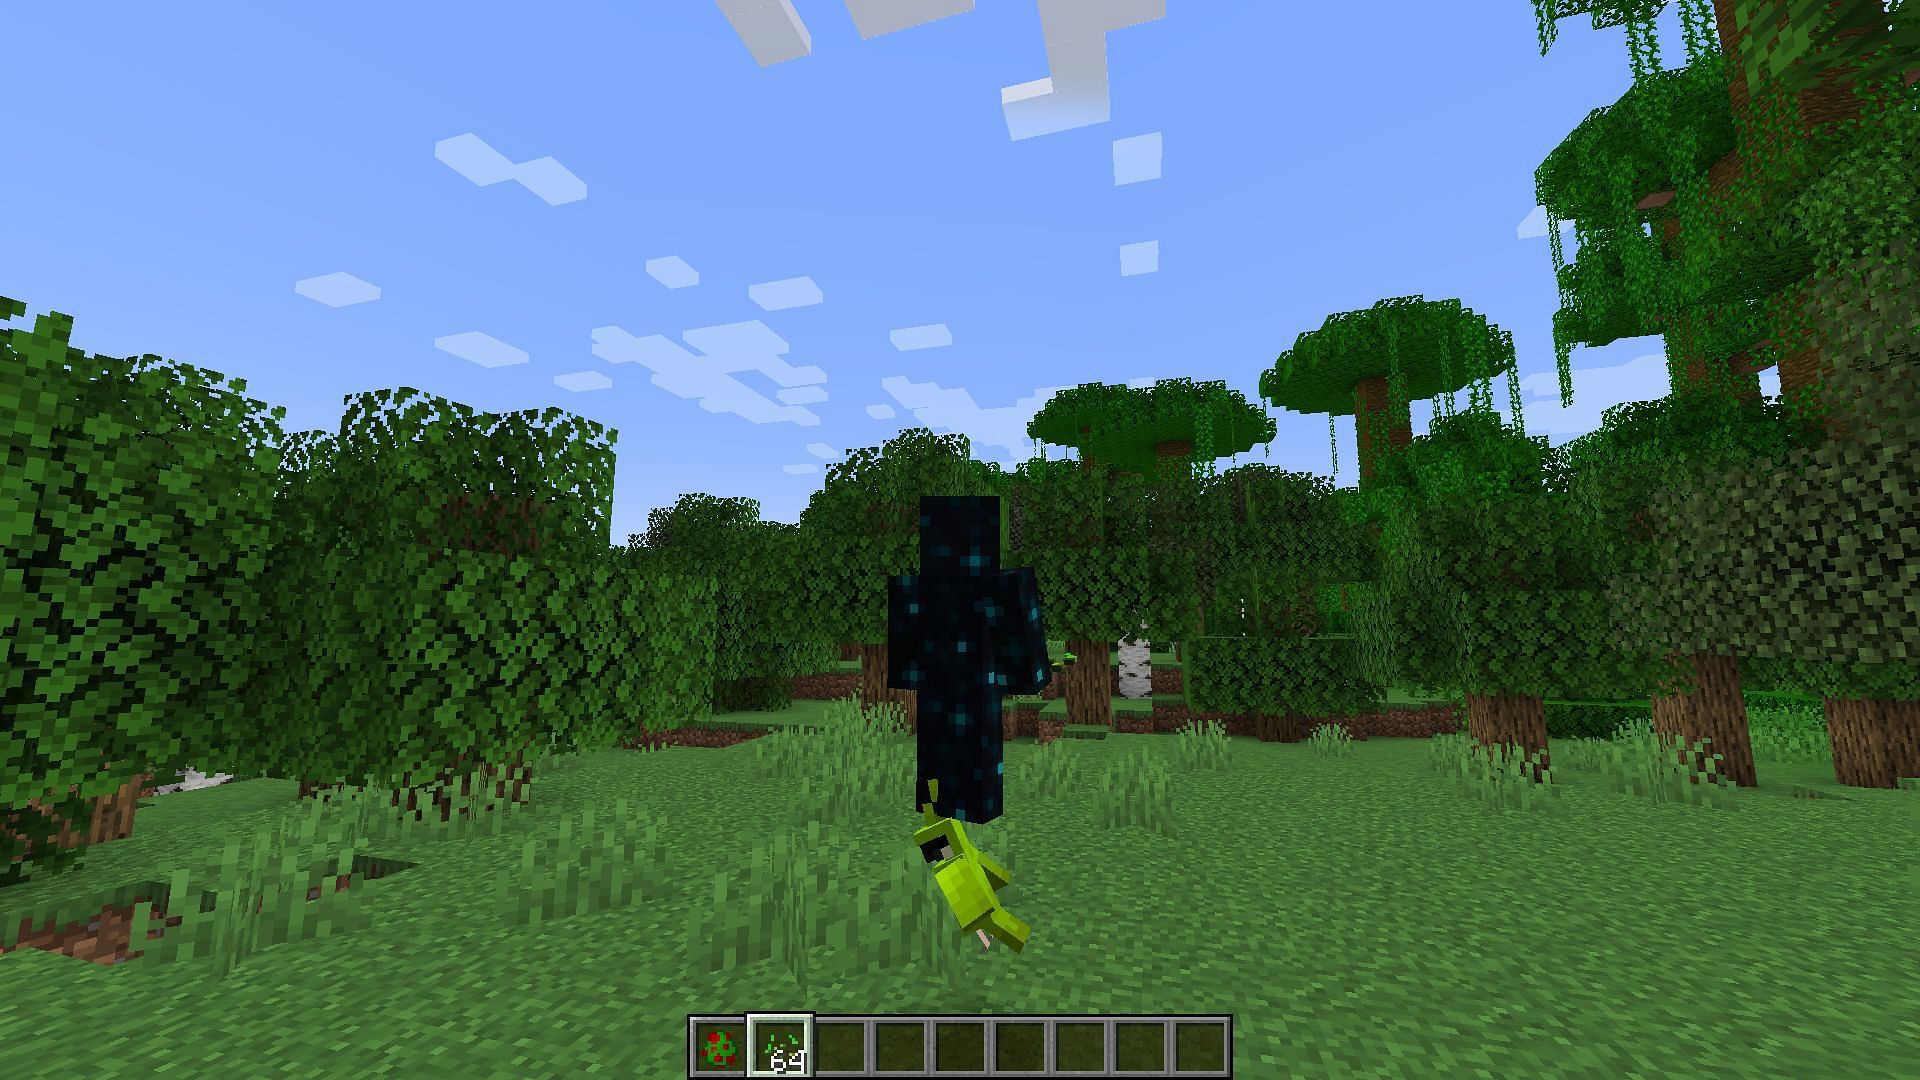 If players constantly jump at the same spot, the parrot dismounts (Image via Minecraft 1.19 update)